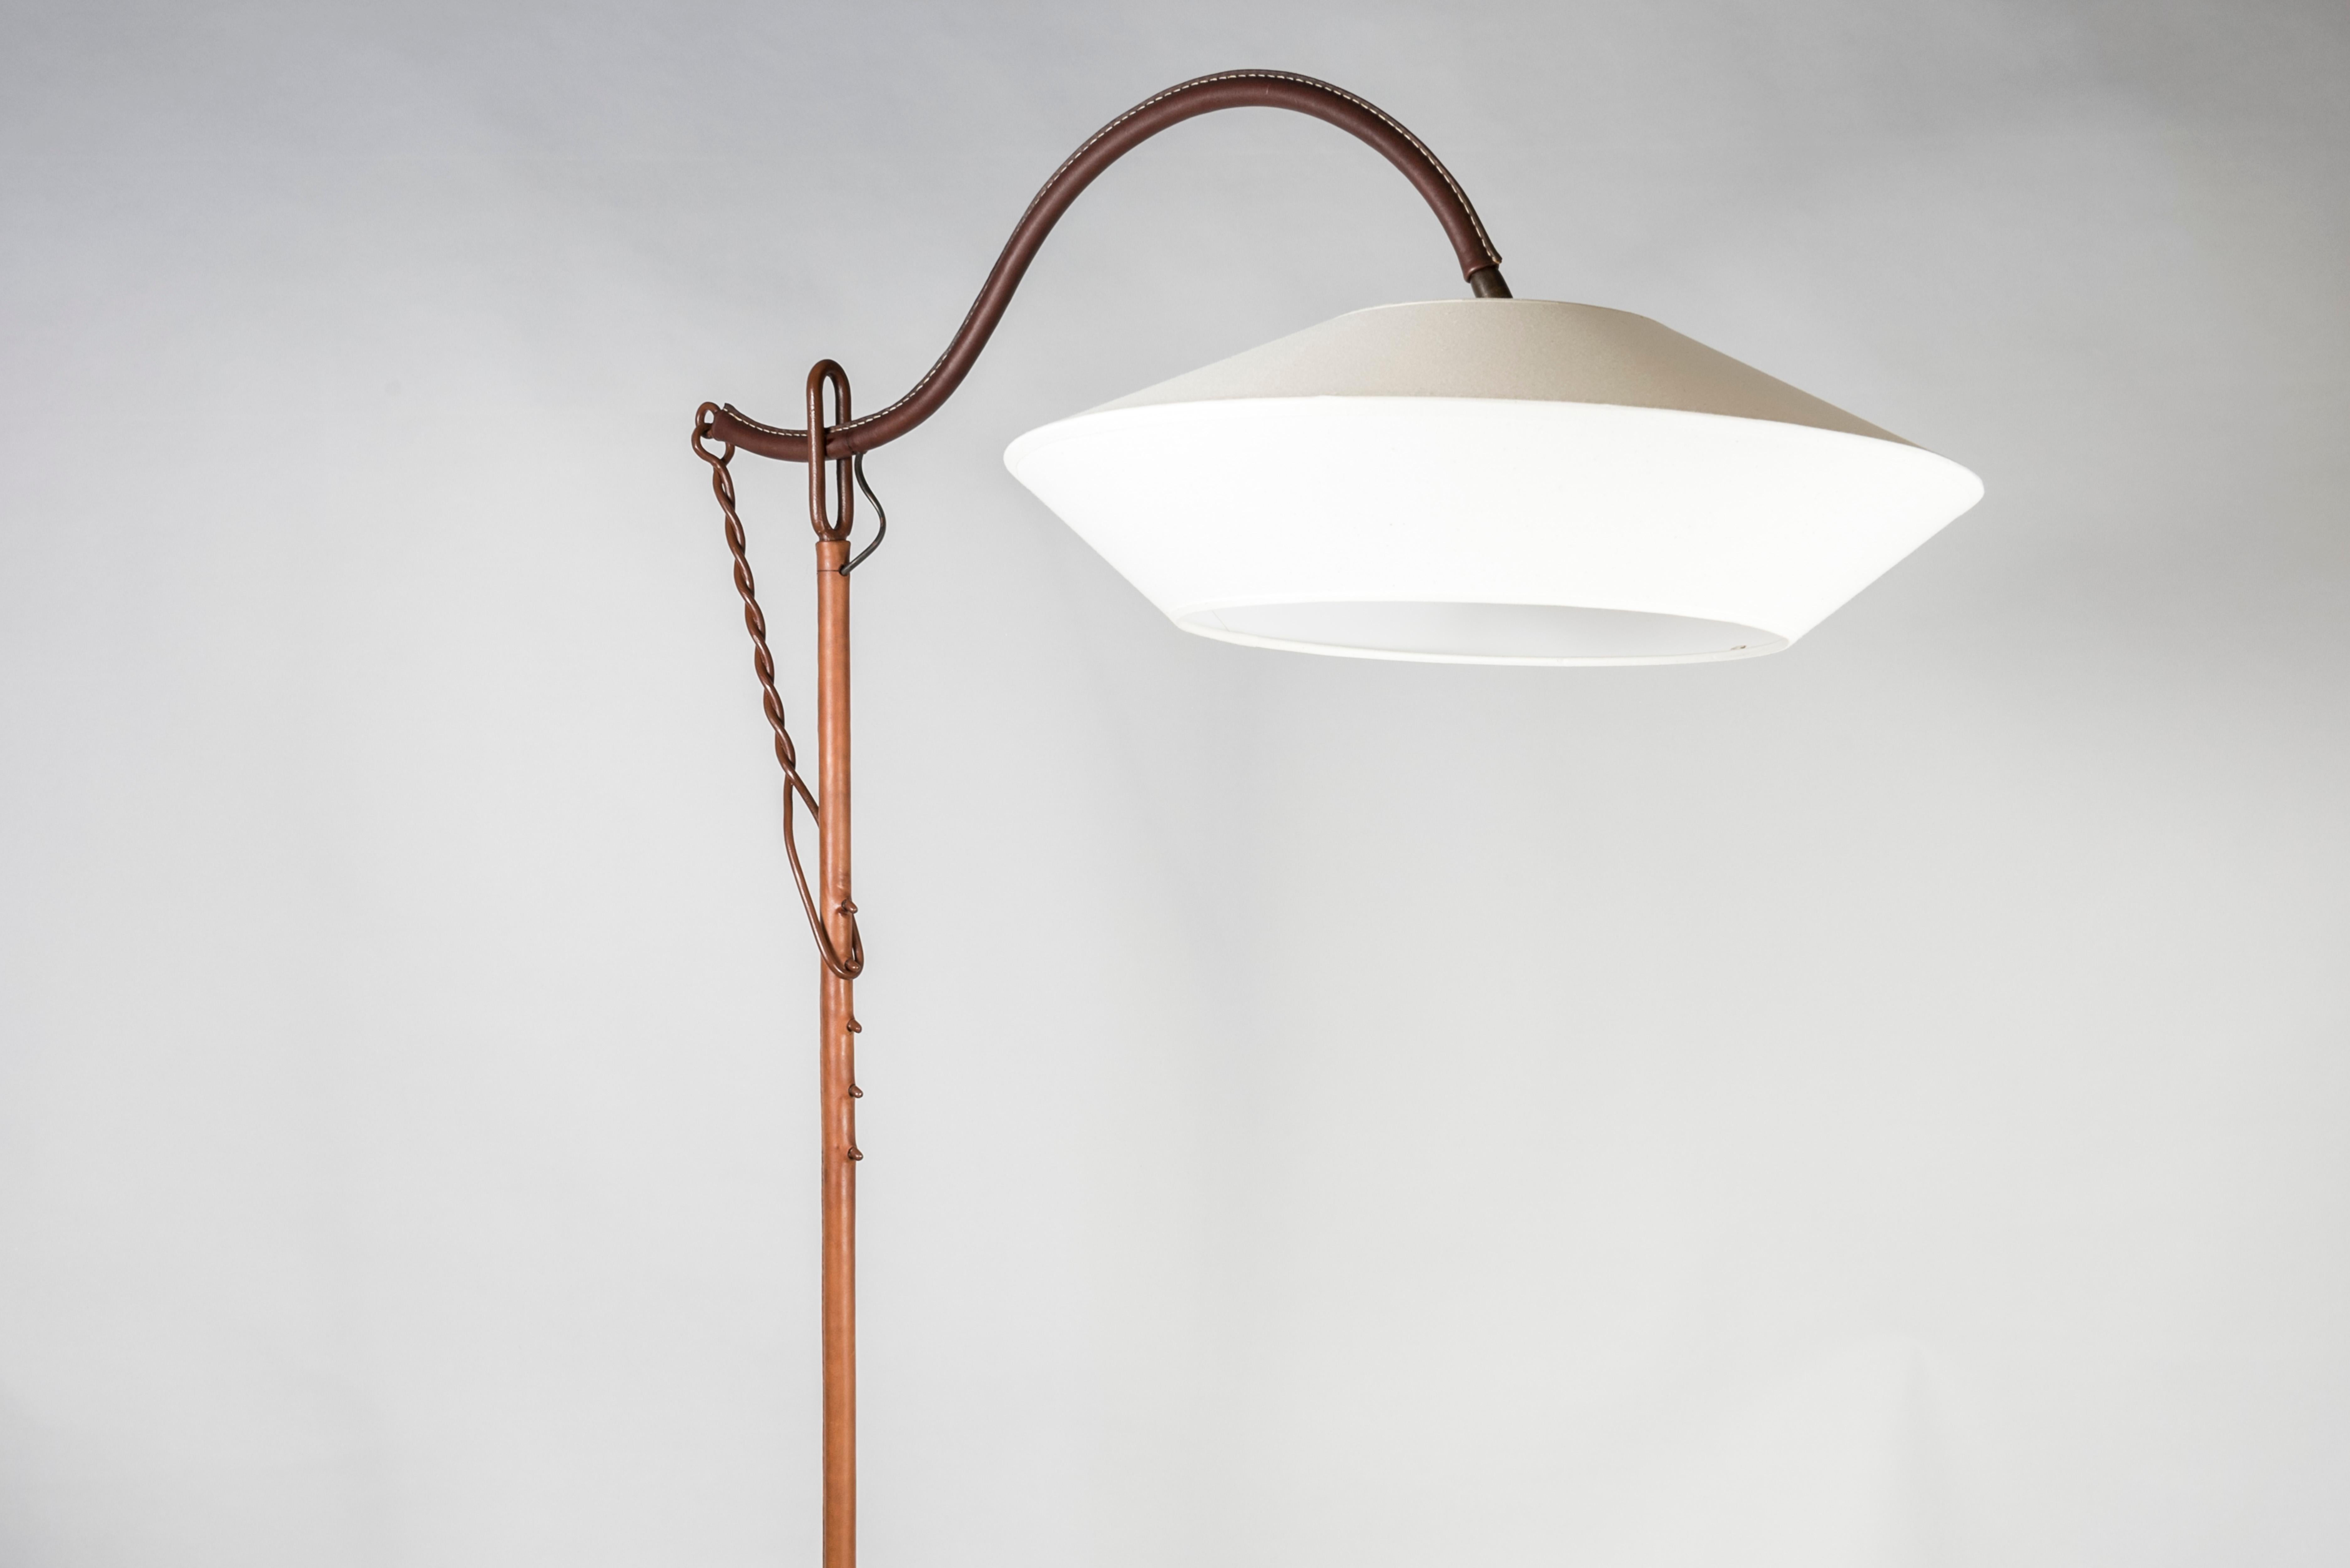 Mid-20th Century 1950's Stitched Leather Floor Lamp by Jacques Adnet For Sale